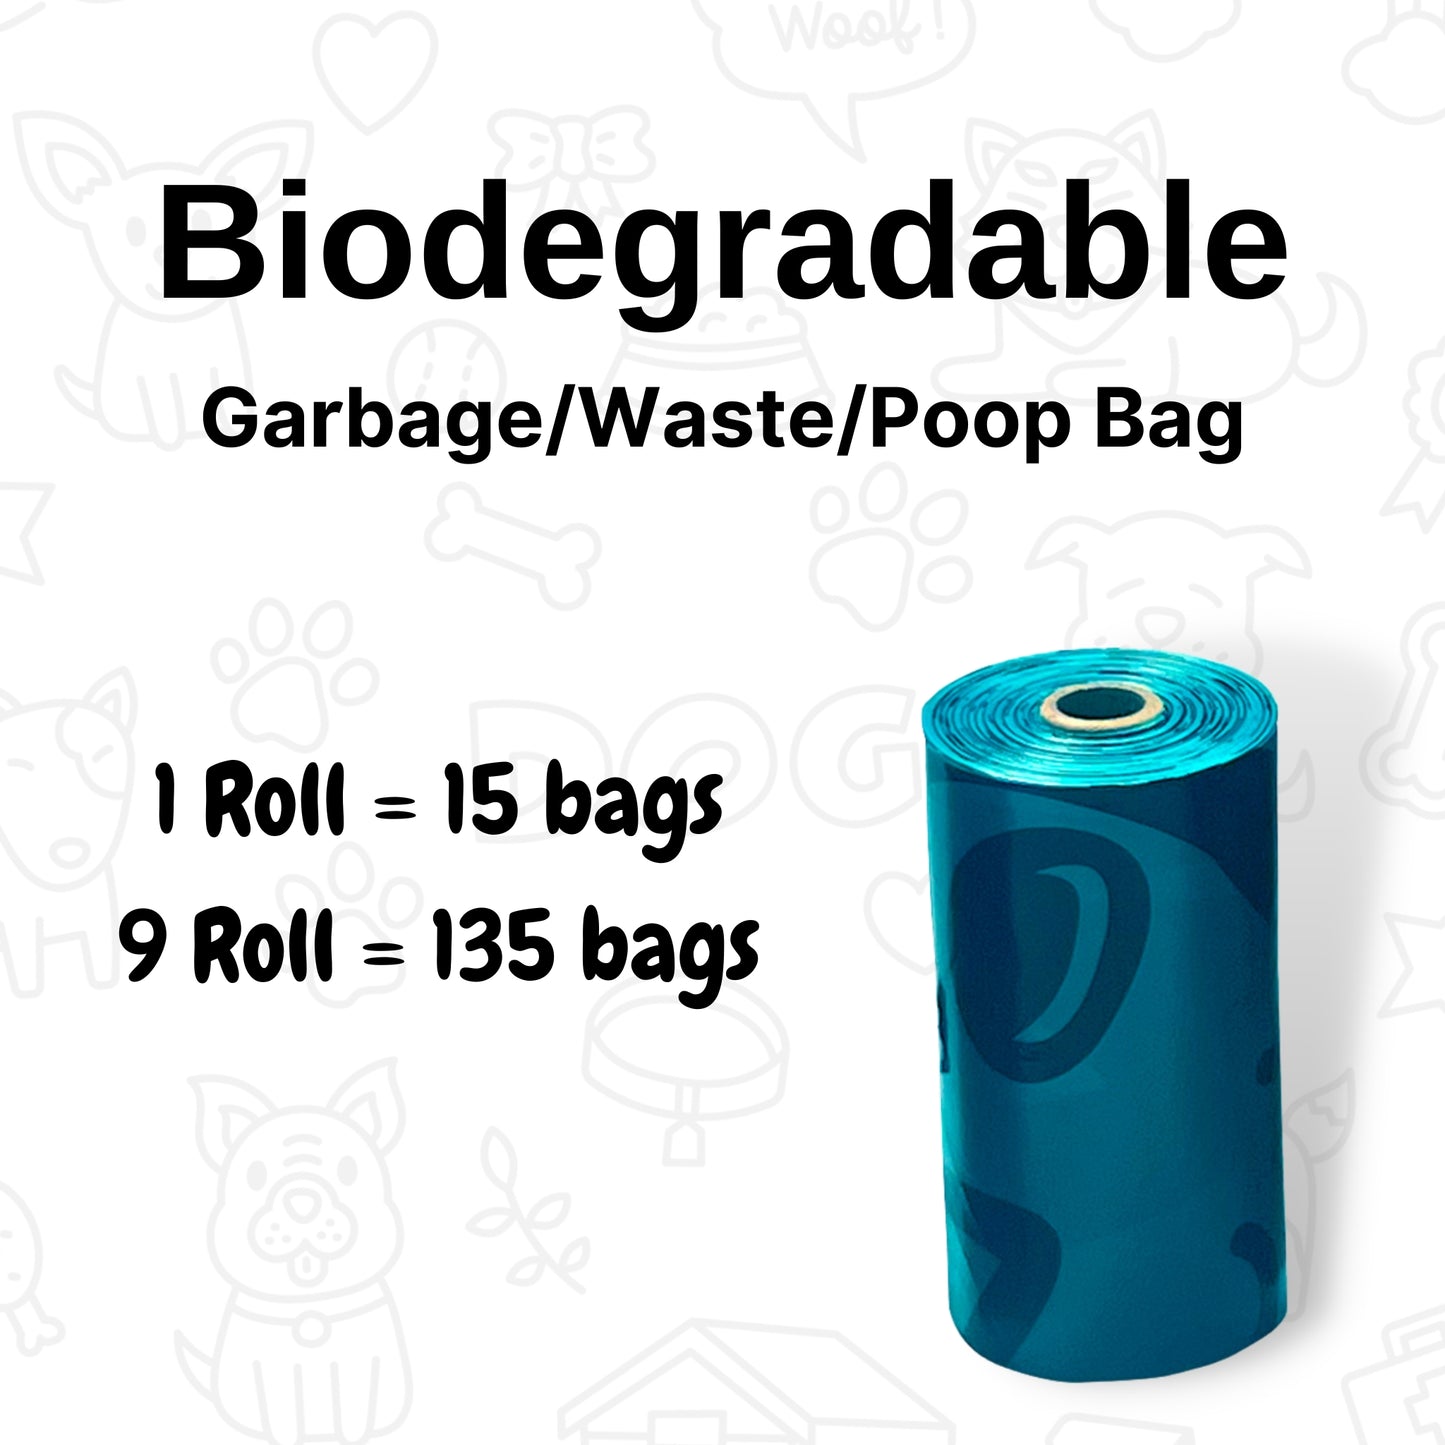 Foodie Puppies Biodegradable 9 Rolls, 135 Poop Bags for Dogs & Cats